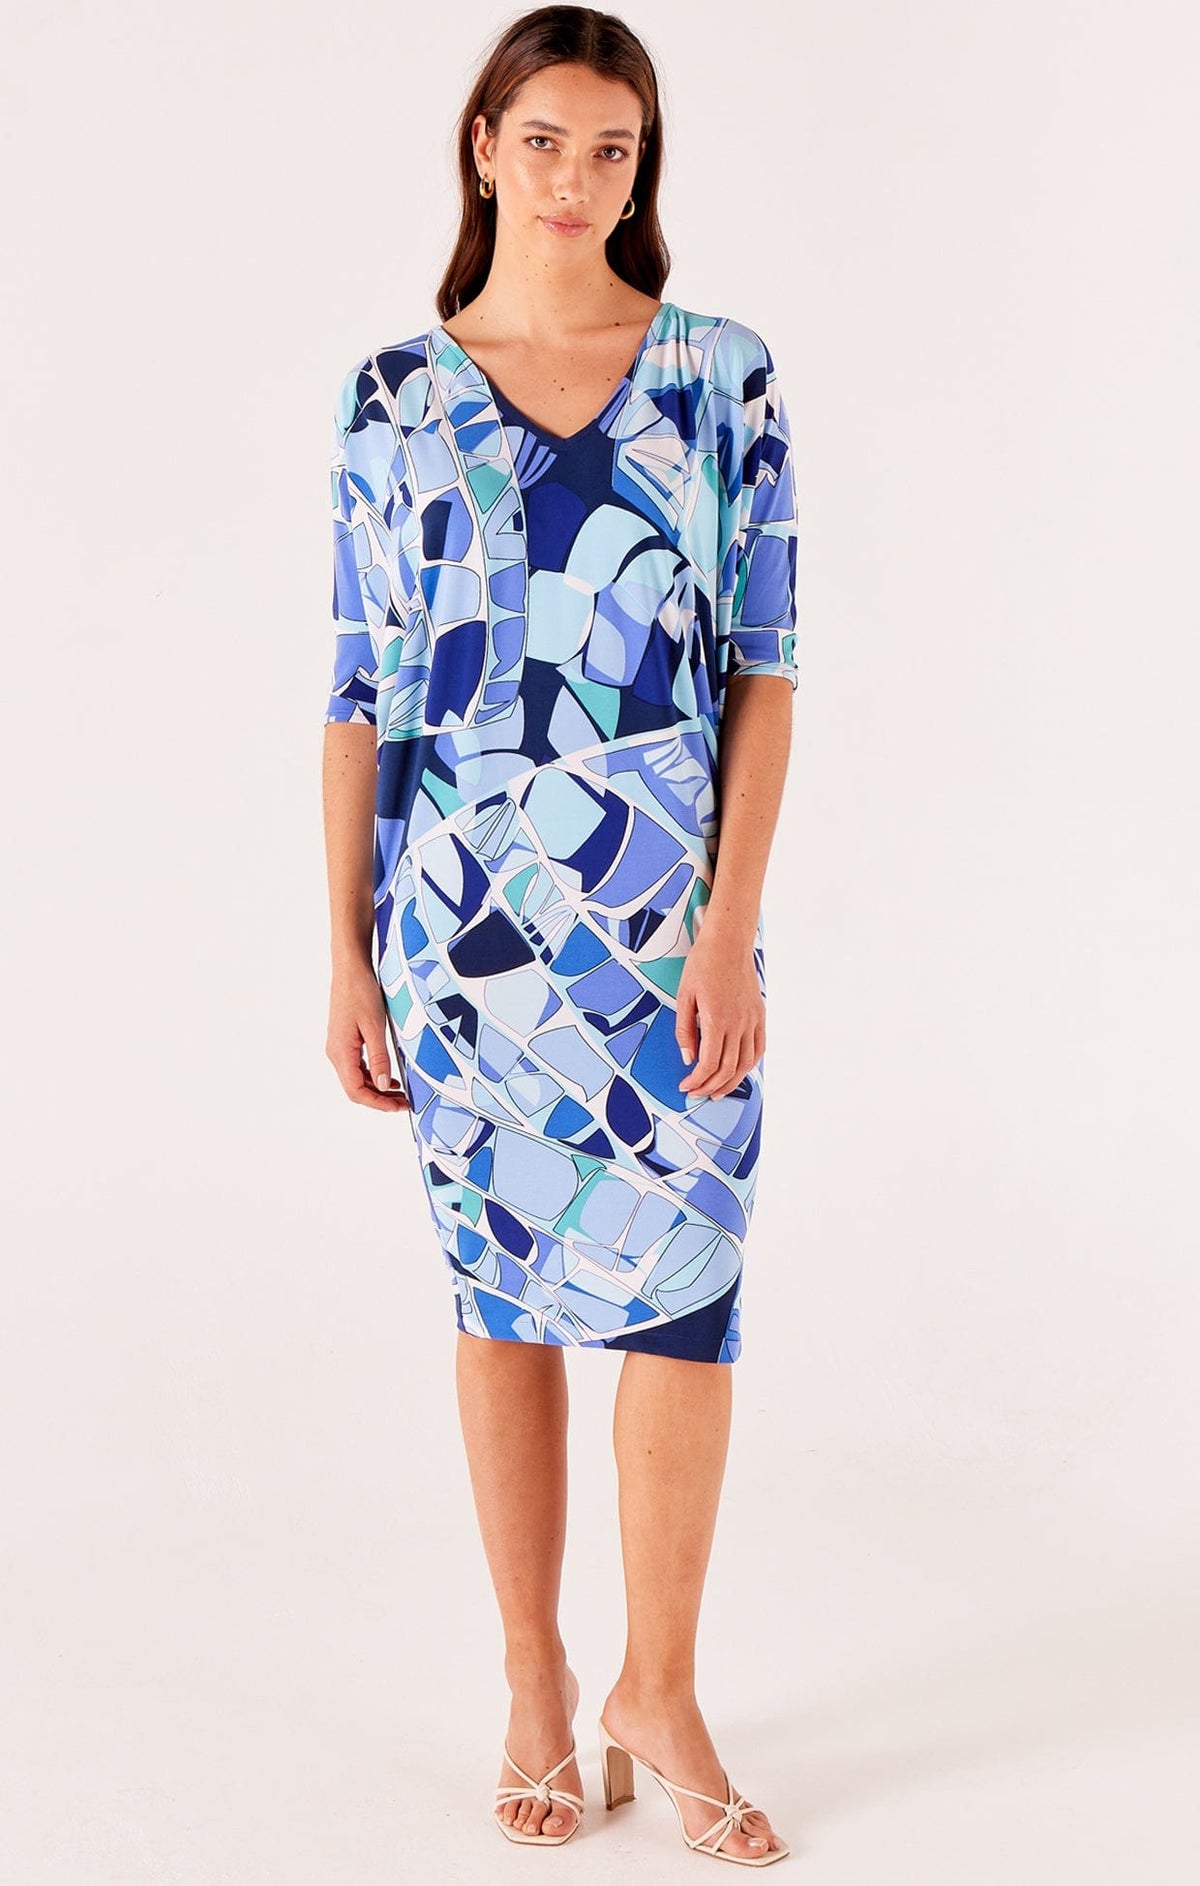 Dresses Multi Occasion LAVENDER HAZE BATWING DRESS IN AQUA ABSTRACT